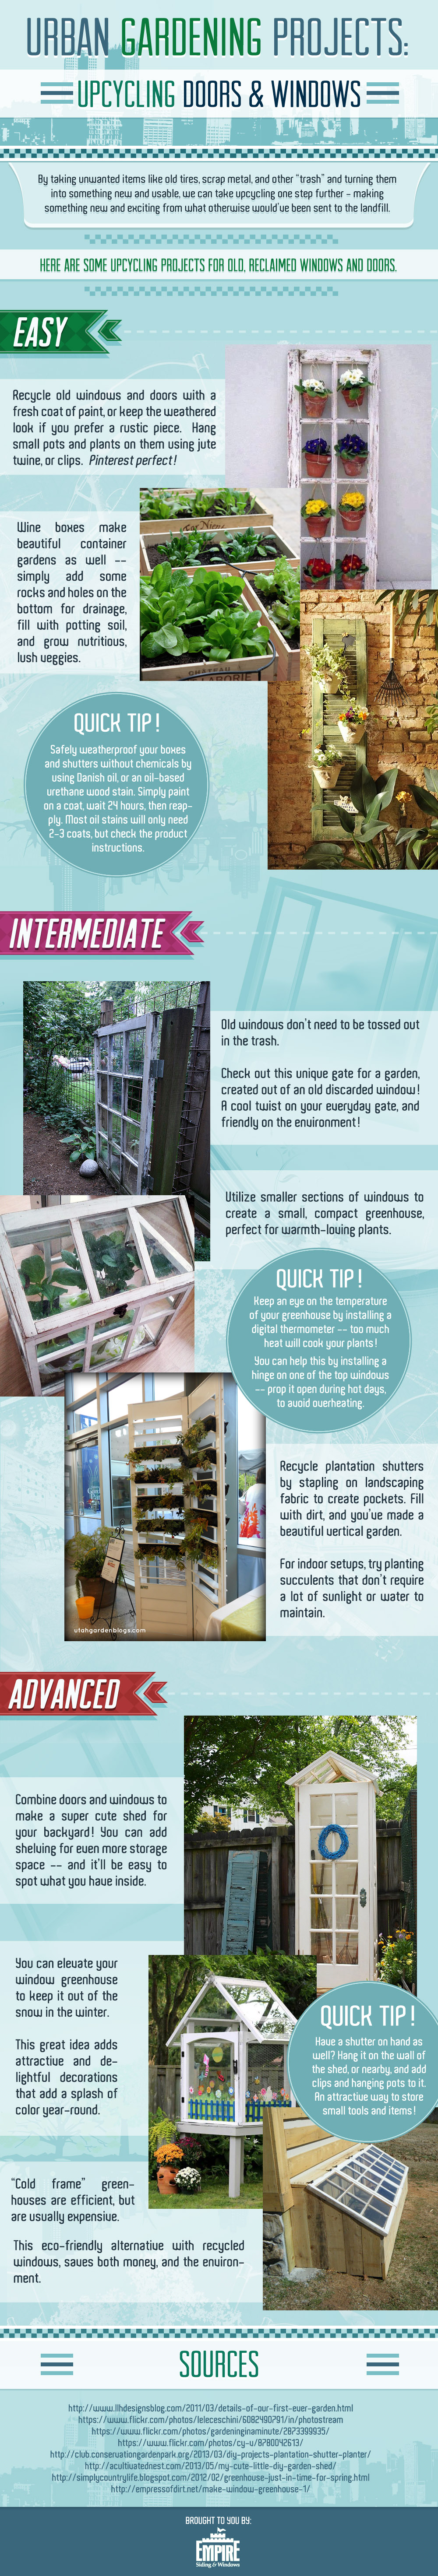 Upcycling Windows & Doors: Wintertime Gardening Projects